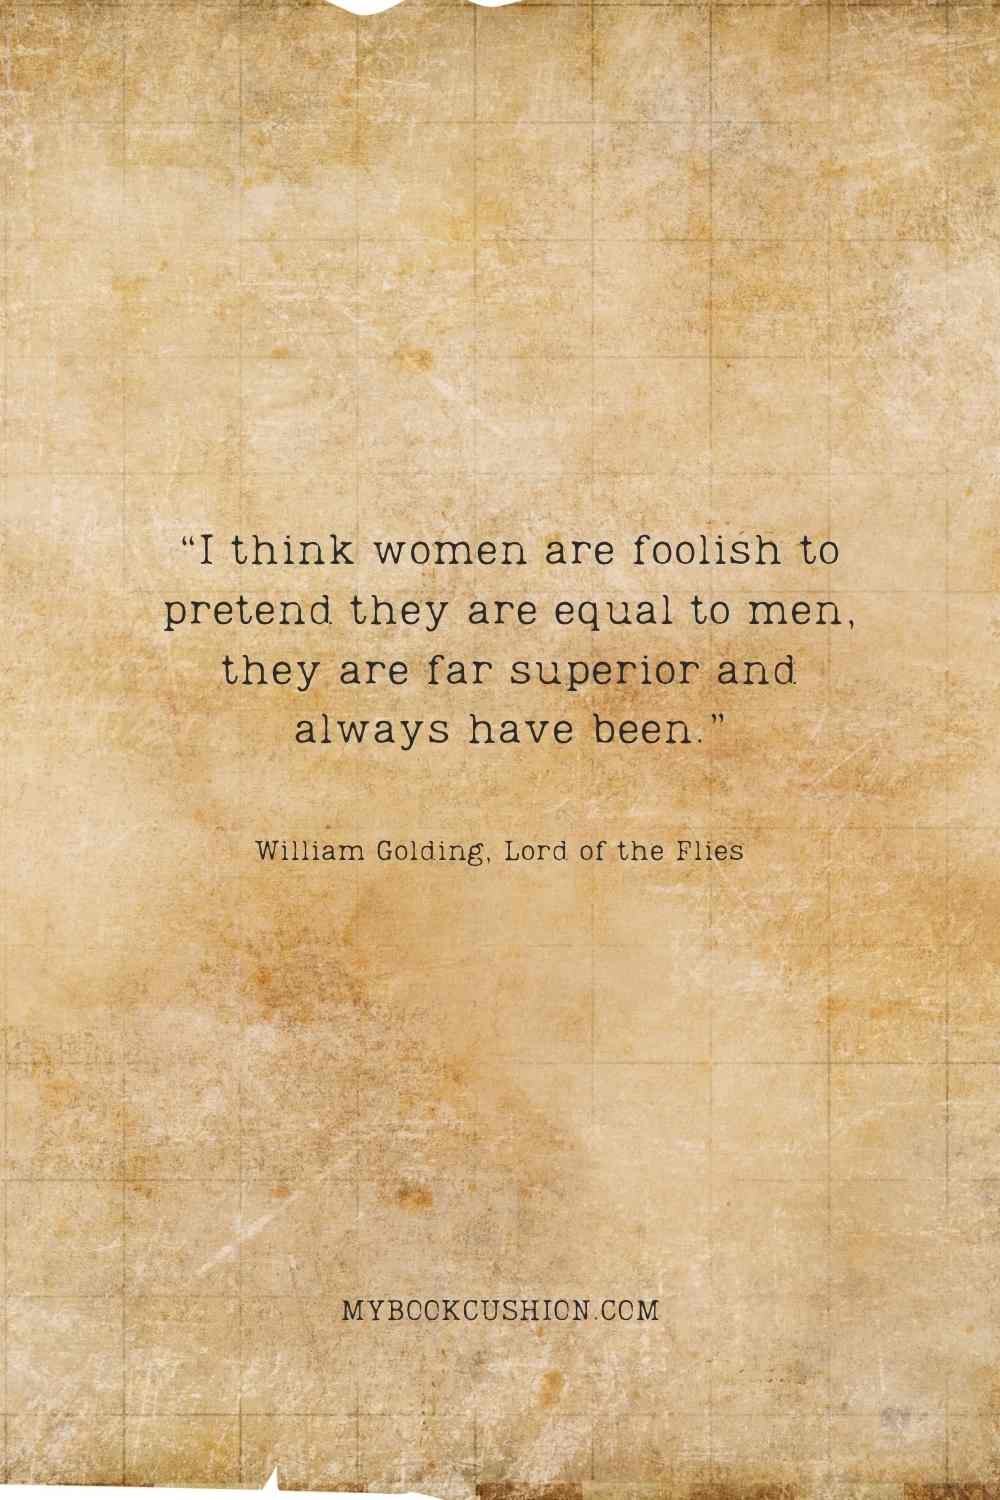 “I think women are foolish to pretend they are equal to men, they are far superior and always have been.” - William Golding, Lord of the Flies